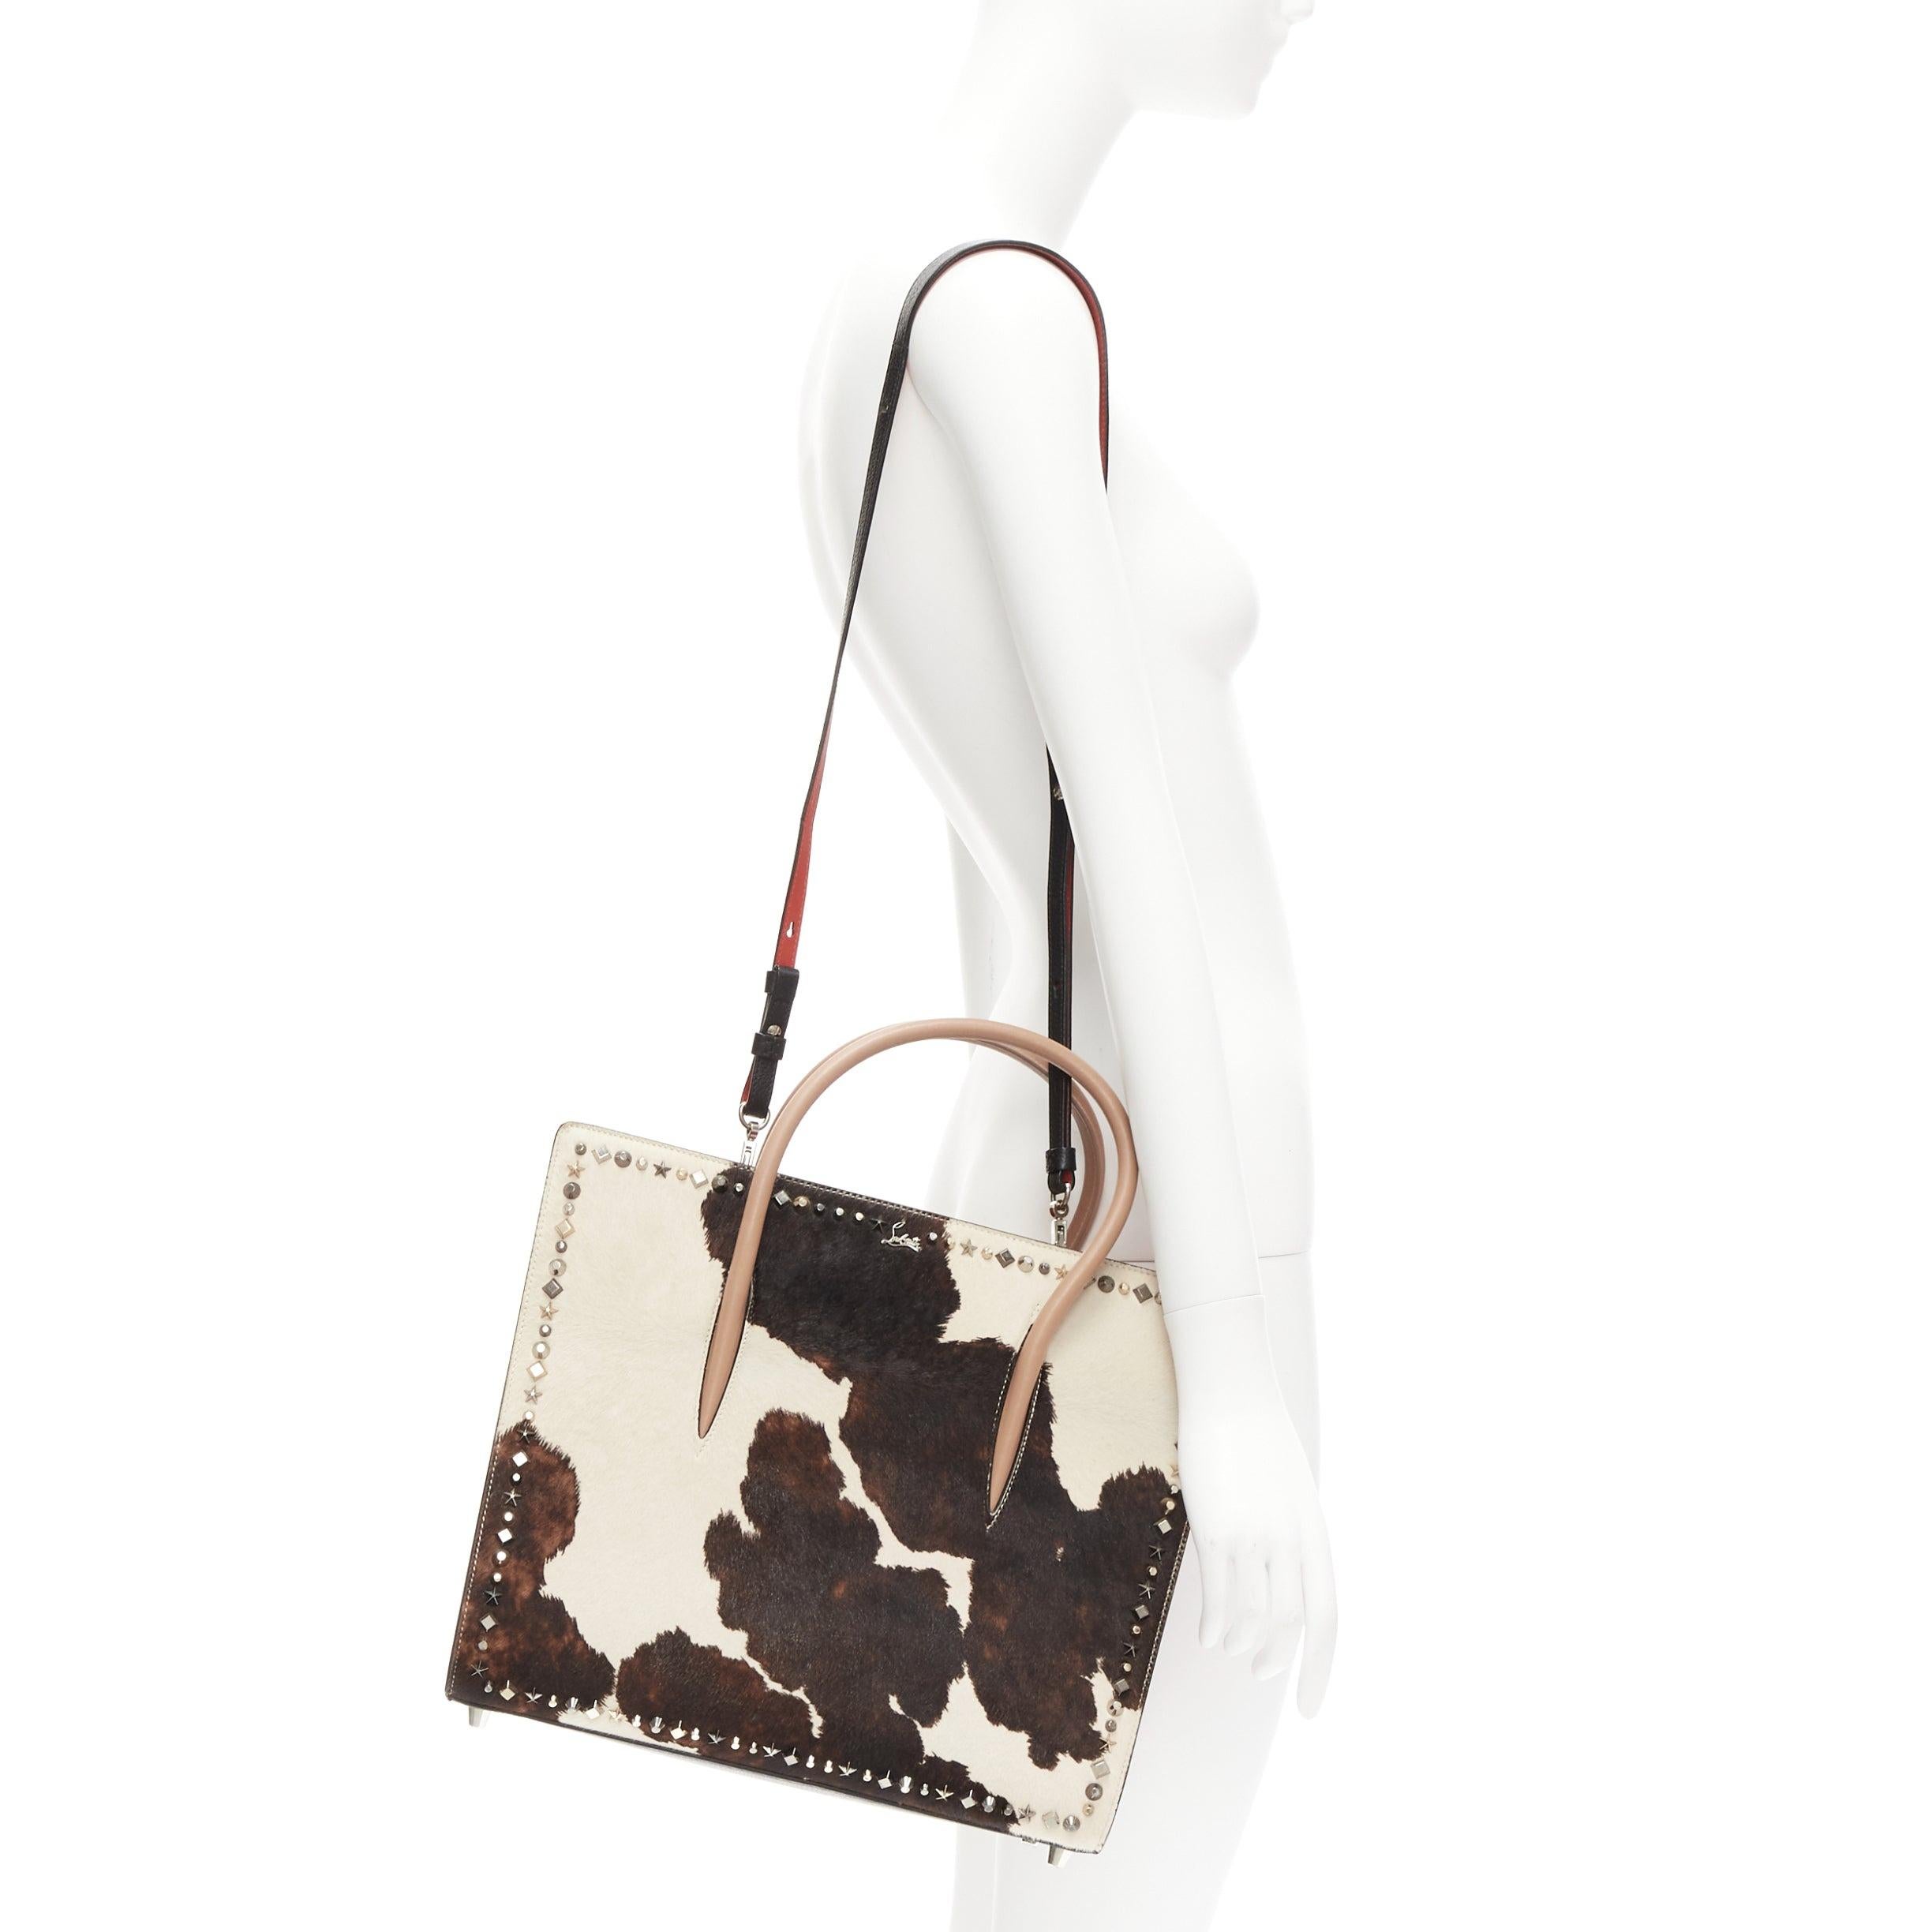 CHRISTIAN LOUBOUTIN Paloma Large brown cow print pony hair studded tote bag
Reference: TGAS/D00846
Brand: Christian Louboutin
Model: Paloma Large
Material: Leather
Color: Multicolour, Silver
Pattern: Animal Print
Closure: Loop Through
Lining: Red